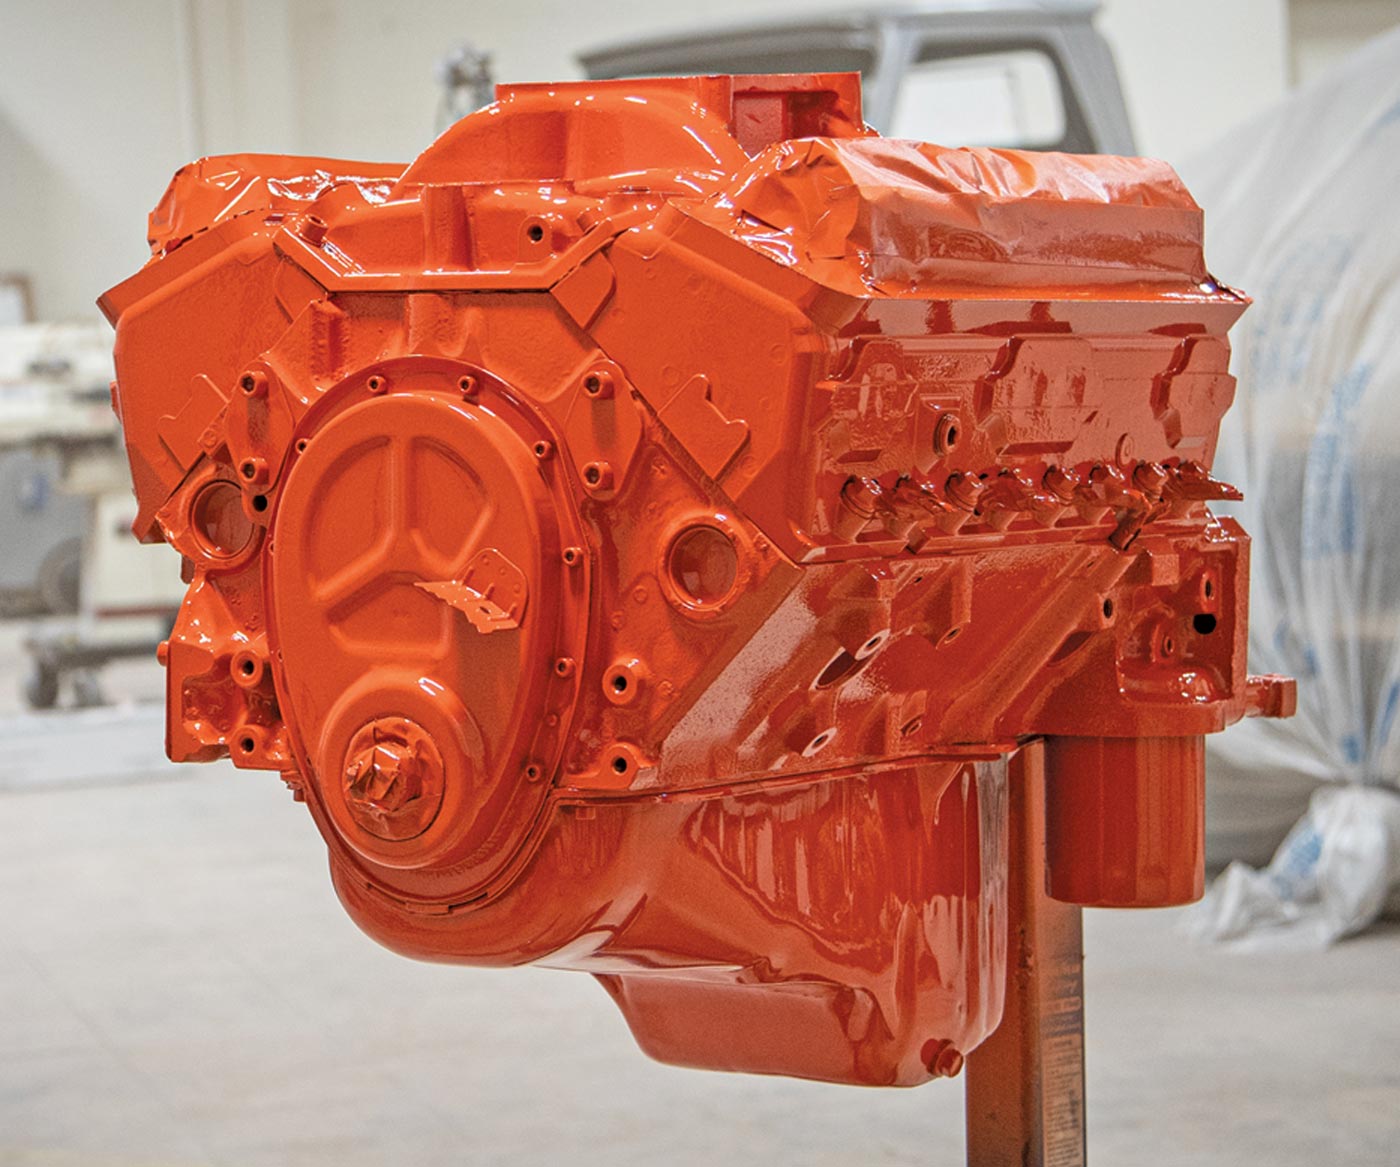 view of the engine covered with three heavy coats of single-stage Chevy Orange